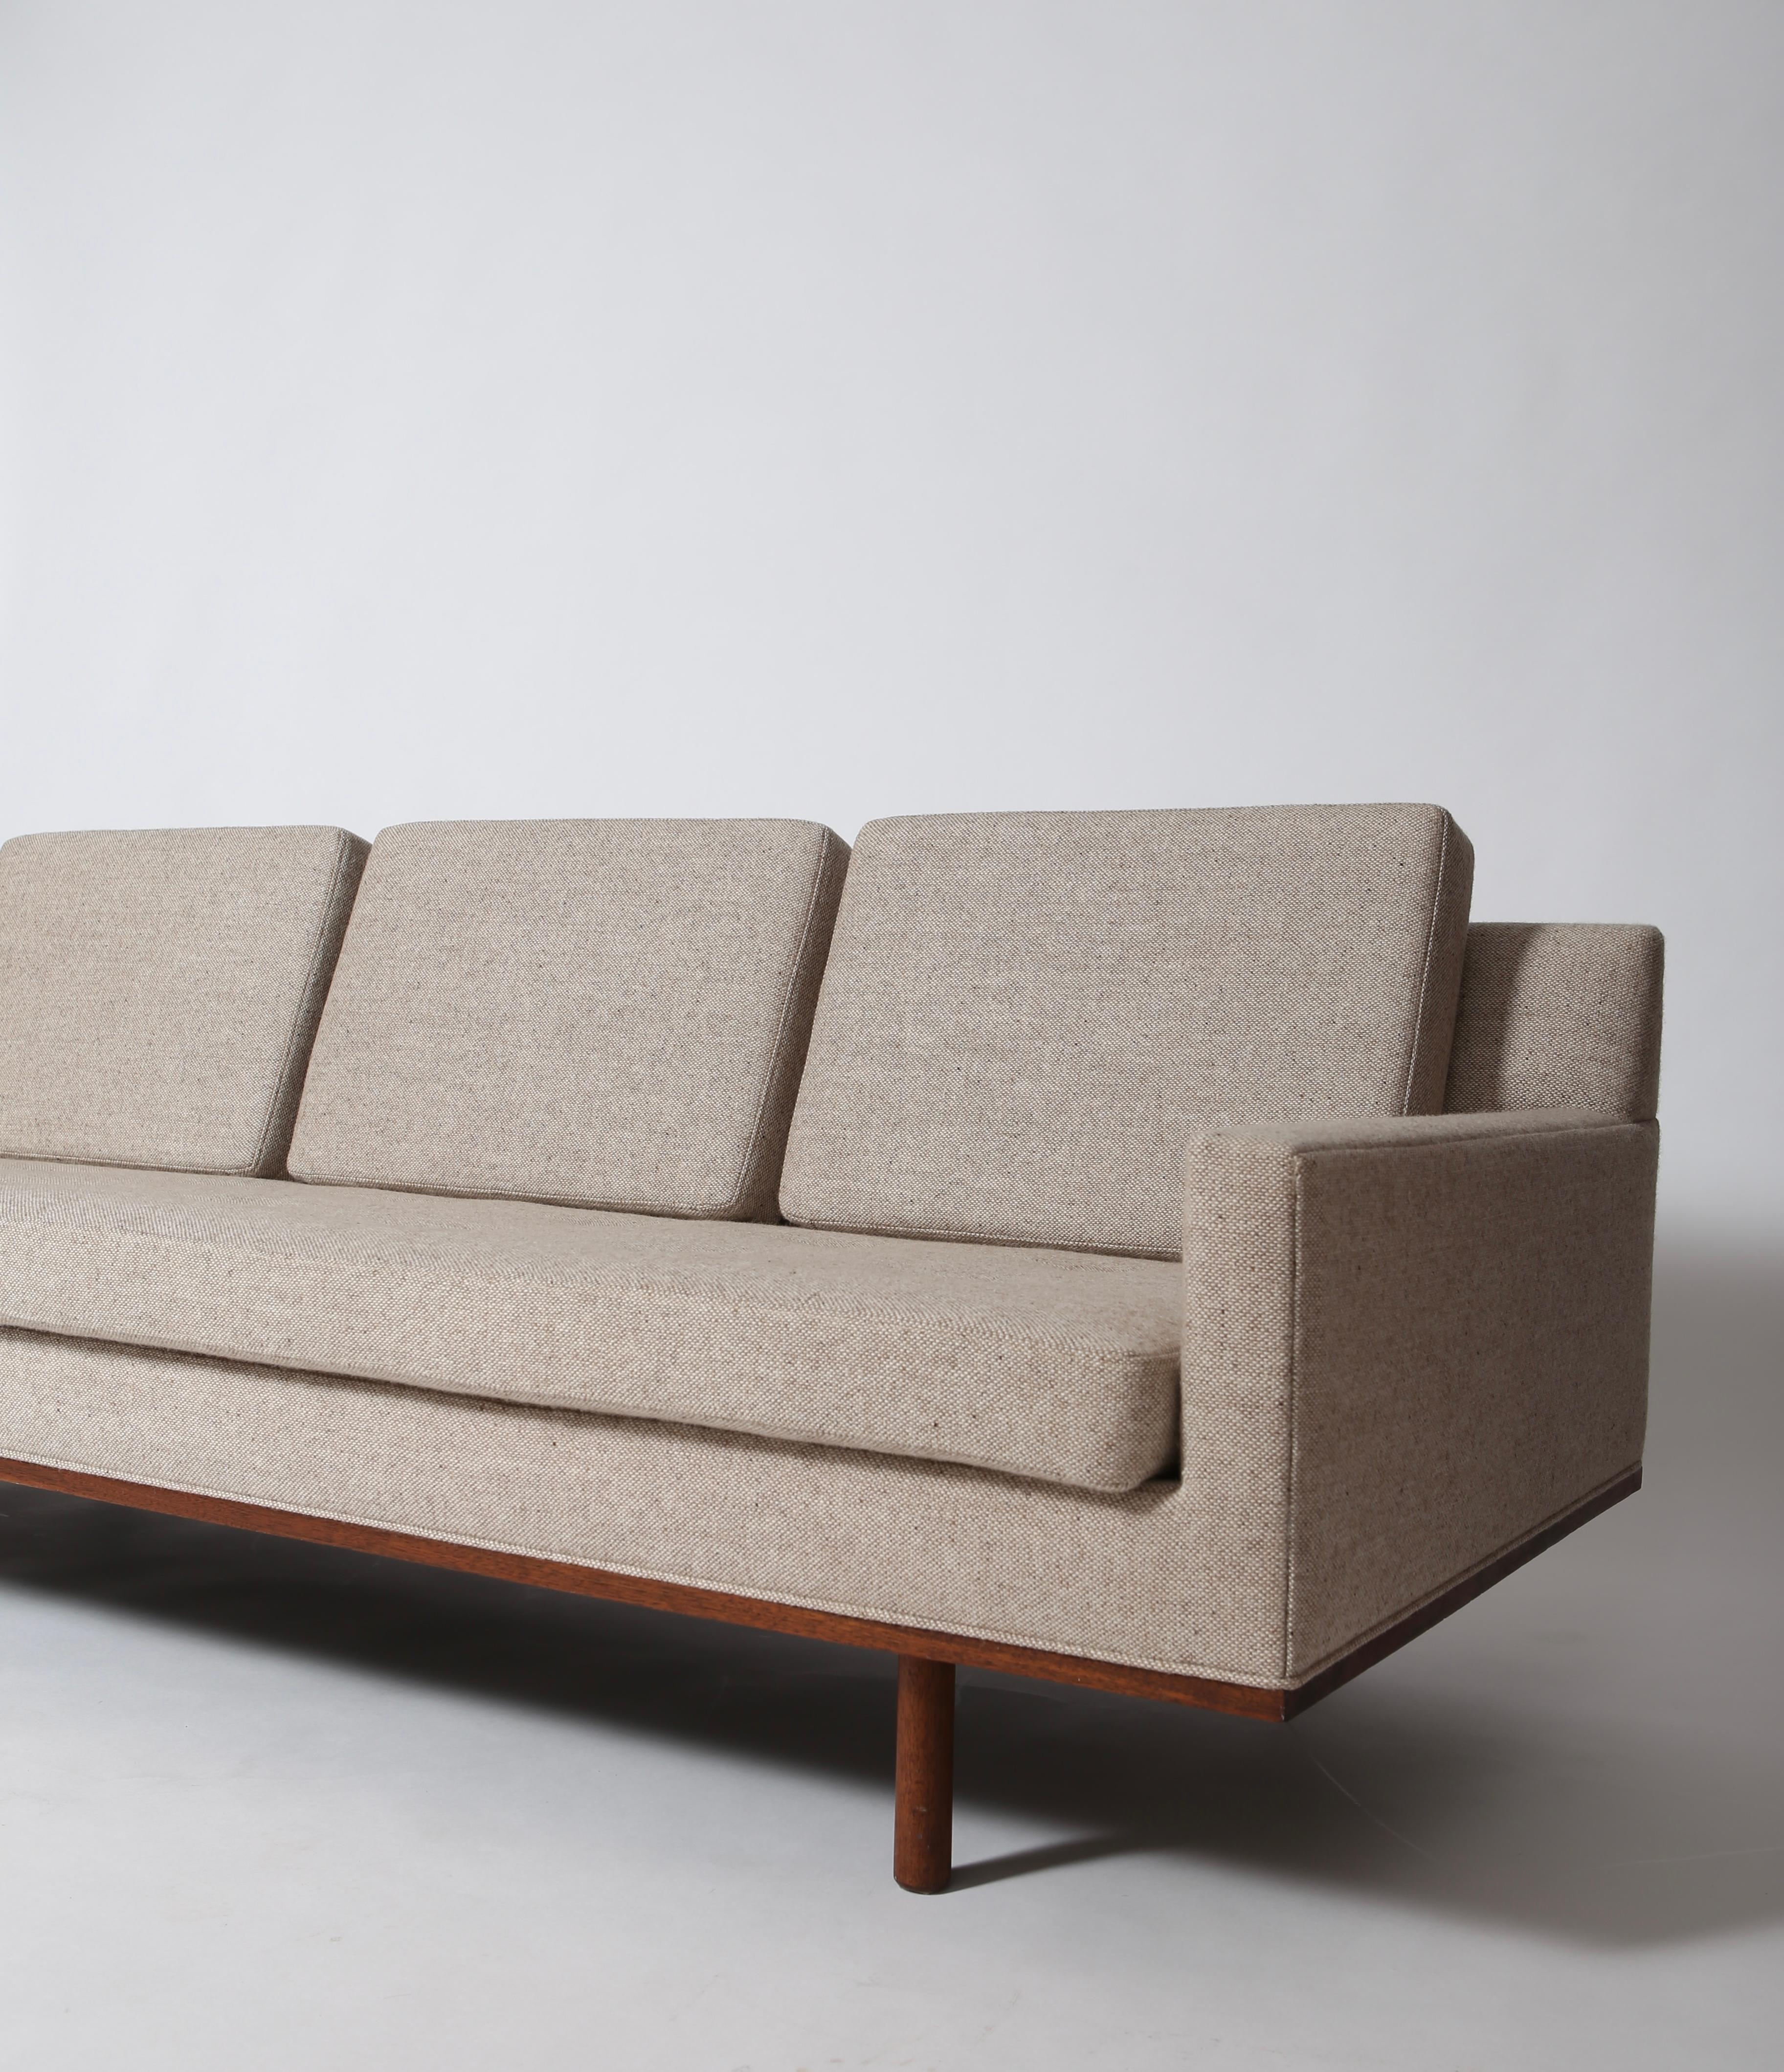 Low-profile tuxedo style mid-century sofa on floating walnut base with gorgeous lines. Reupholstered in a neutral and durable 100% woven wool textile by Knoll. Great size for smaller spaces and very nicely restored. Designed by Jules Heumann for